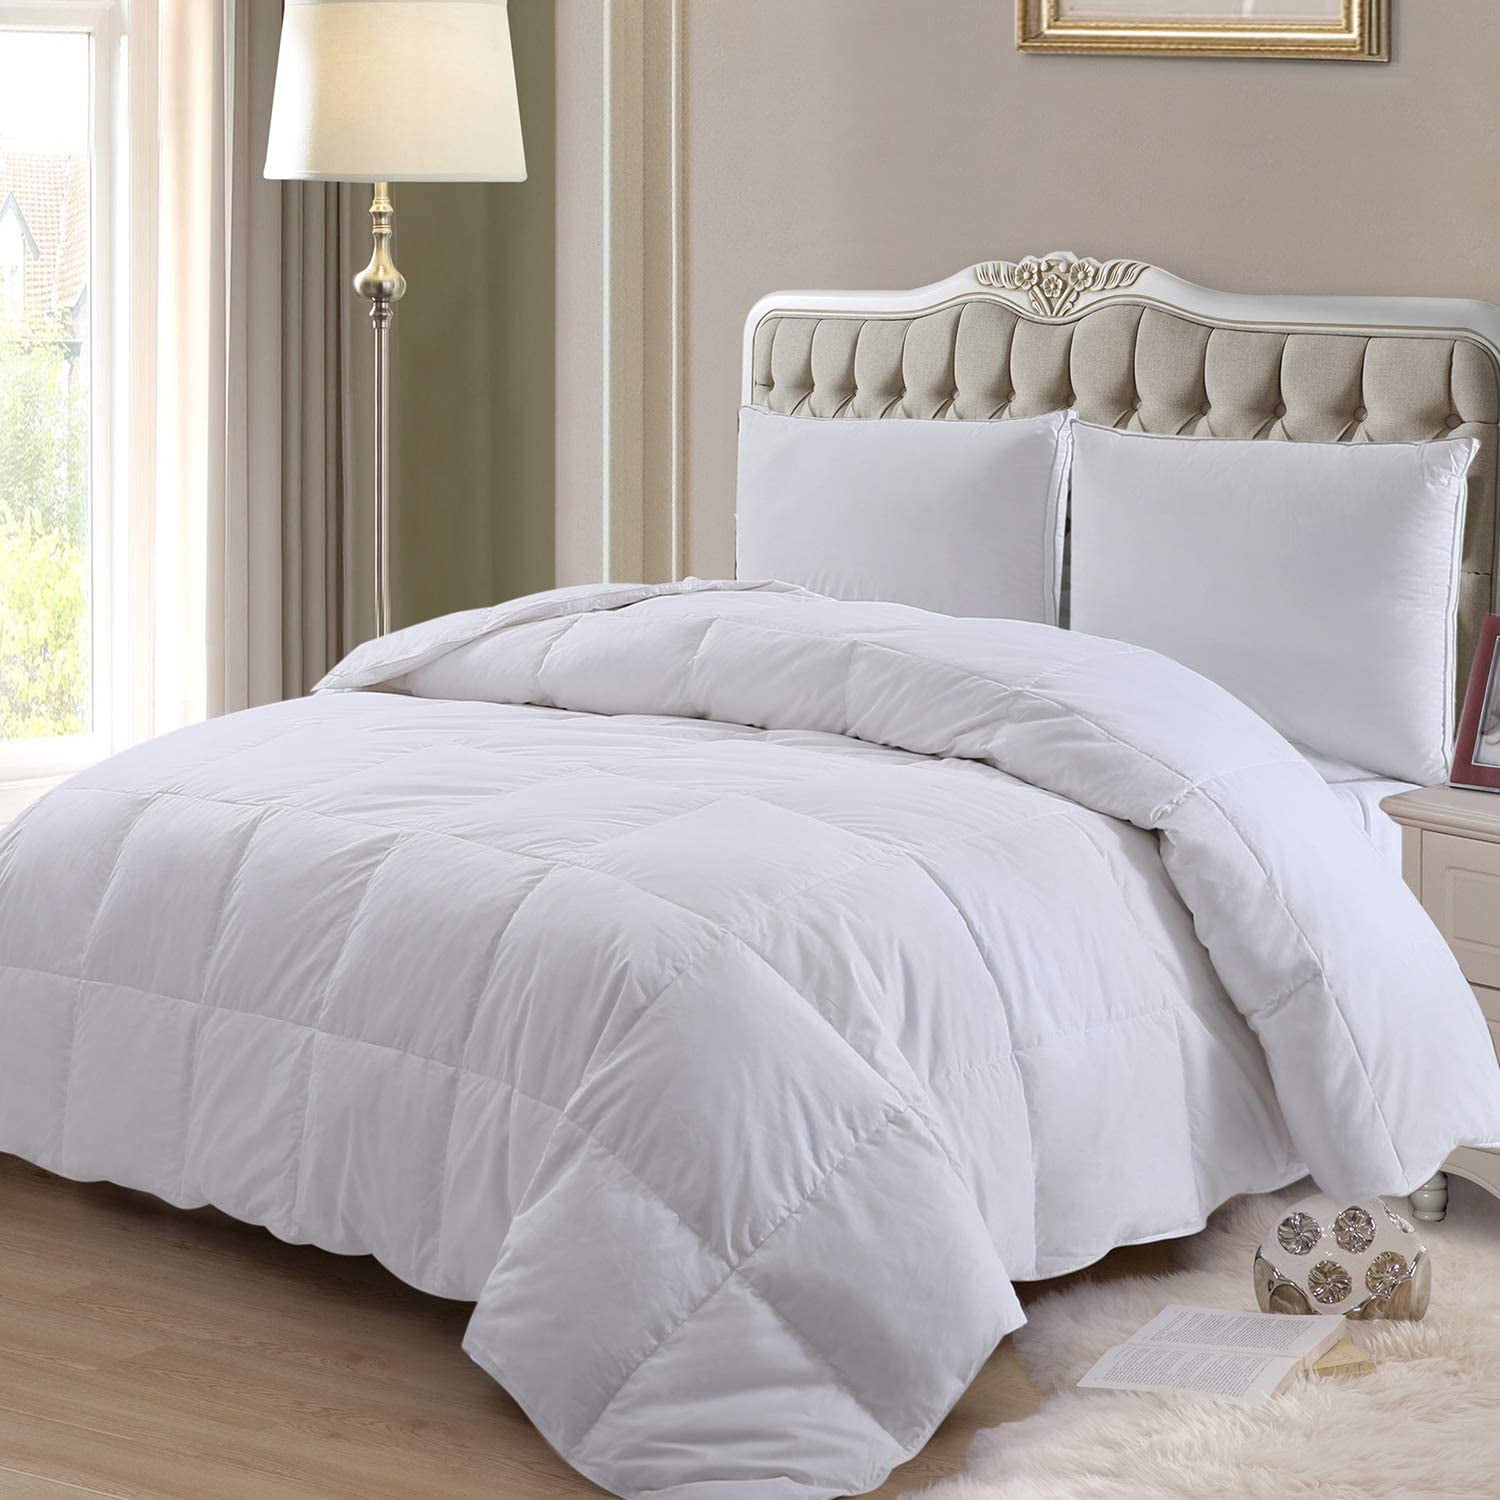 Twin Down Feather Comforter 100% Cotton 233 Thread Count Hypoallergenic White 